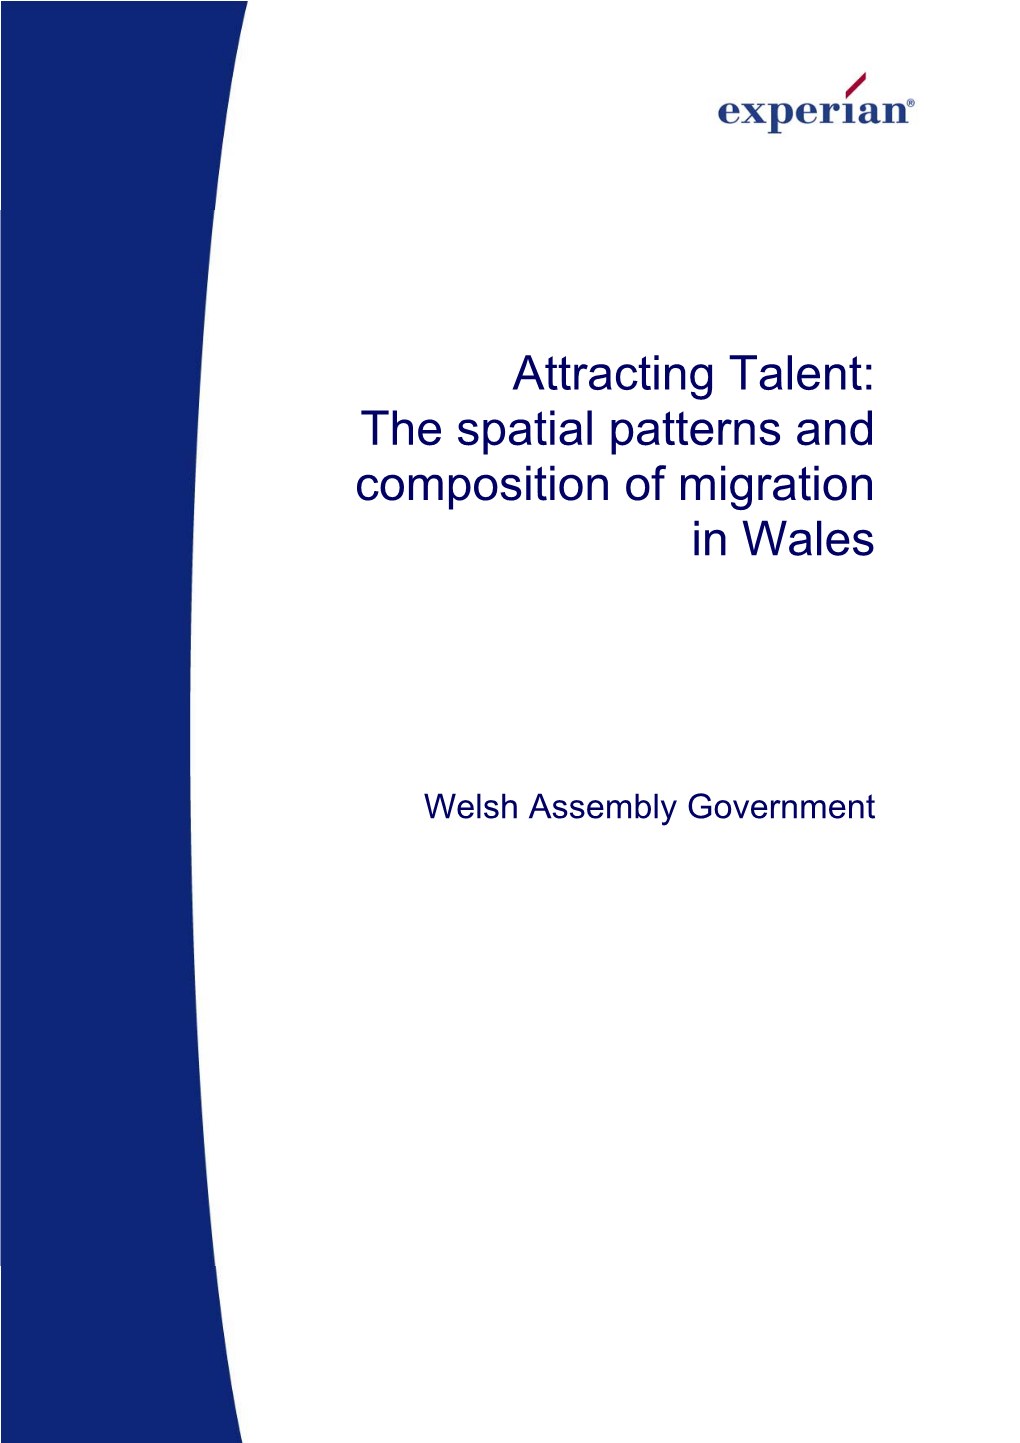 Attracting Talent: the Spatial Patterns and Composition of Migration in Wales